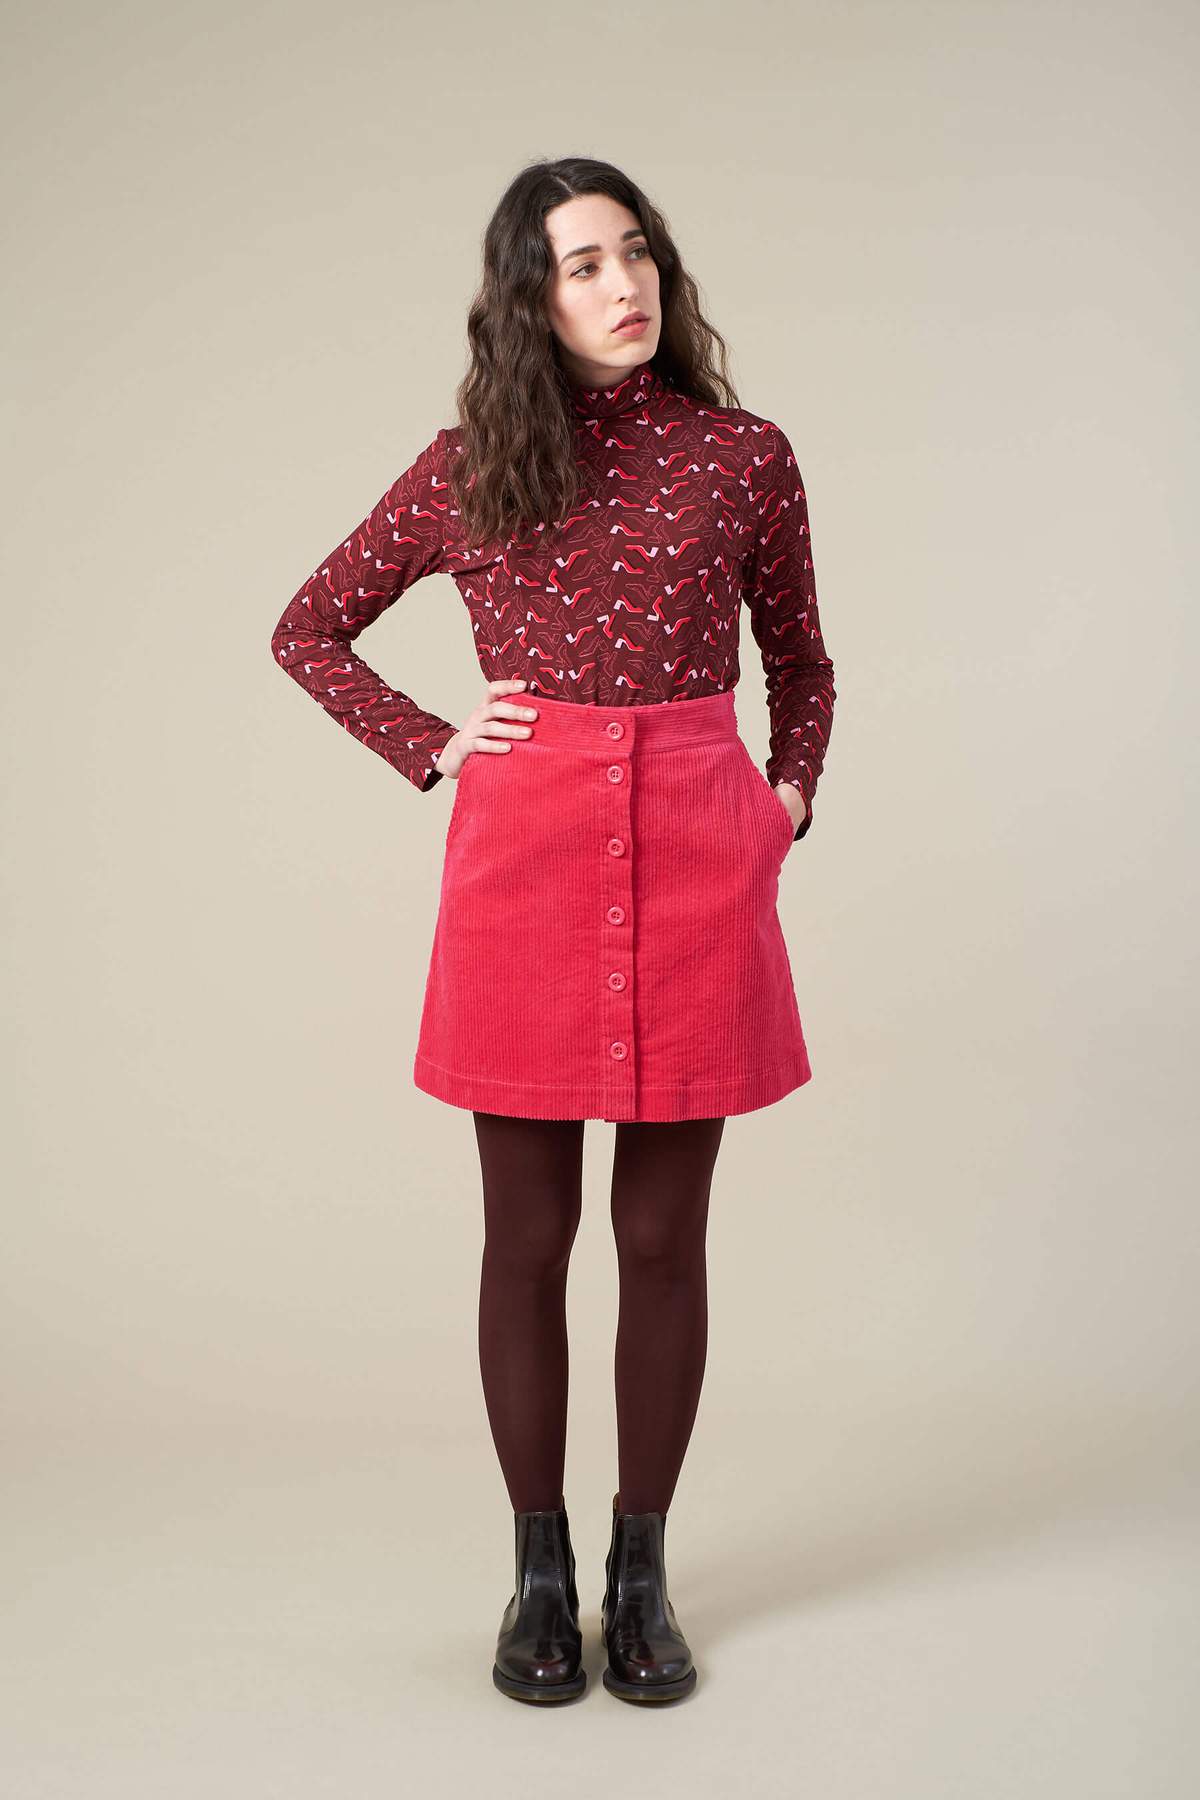 A model wears a pink corduroy skirt paired with a darker maroon red long-sleeve patterned top and black tights. She stands with her hand on her hip, looking away from the camera.